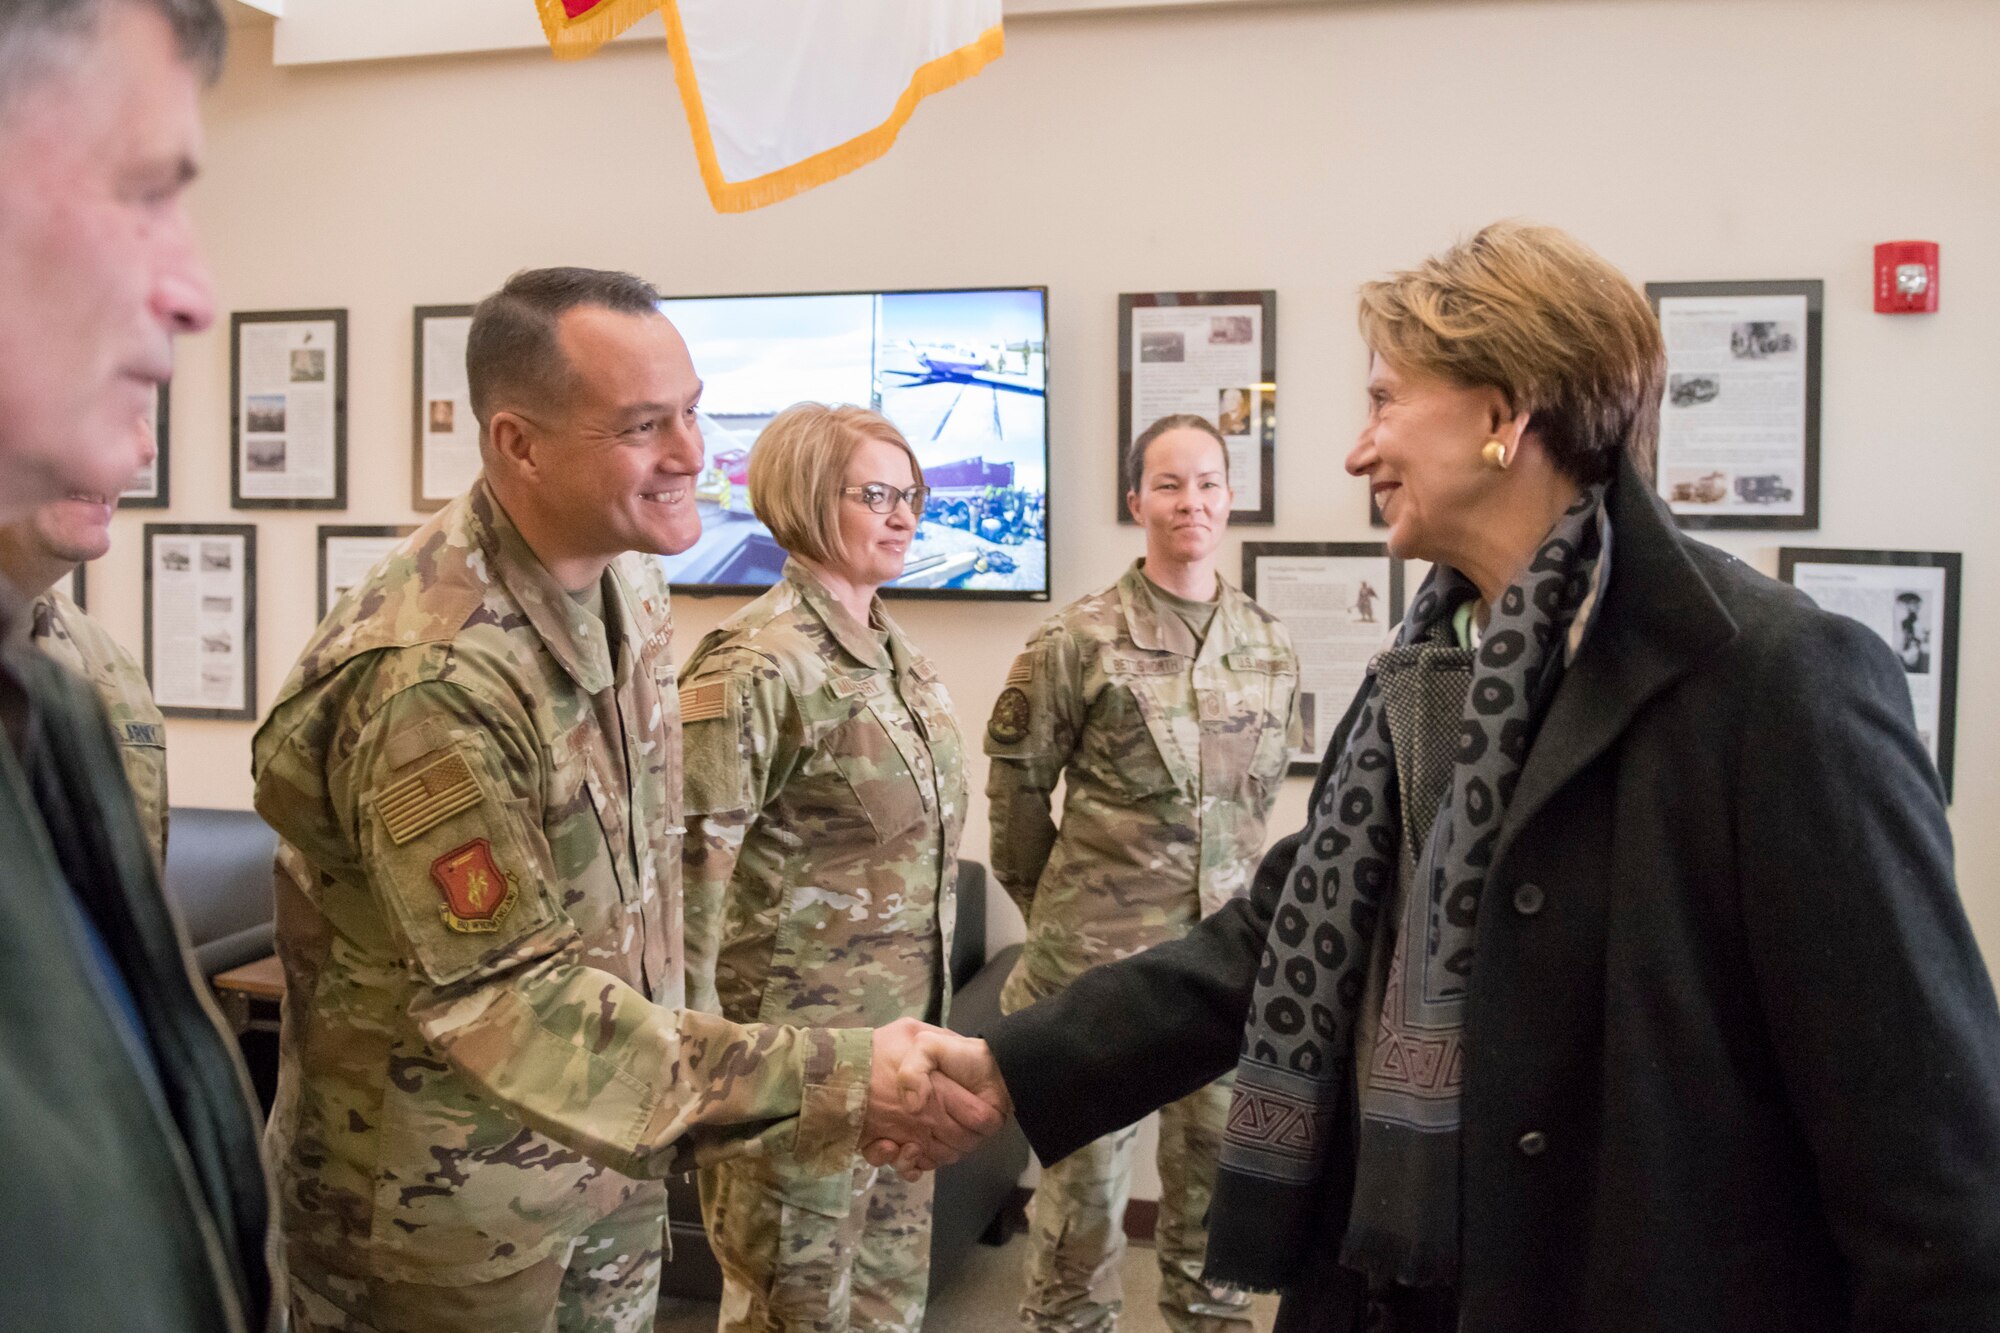 U.S. Air Force Chief Master Sgt. Joshua Moore, state command chief, Wyoming National Guard, greets Secretary of the Air Force Barbara Barrett at the 153d Airlift Wing, Wyoming Air National Guard Base, Cheyenne, Wyo., Oct. 27, 2019. This visit marks Barrett's first official visit since becoming the SECAF.